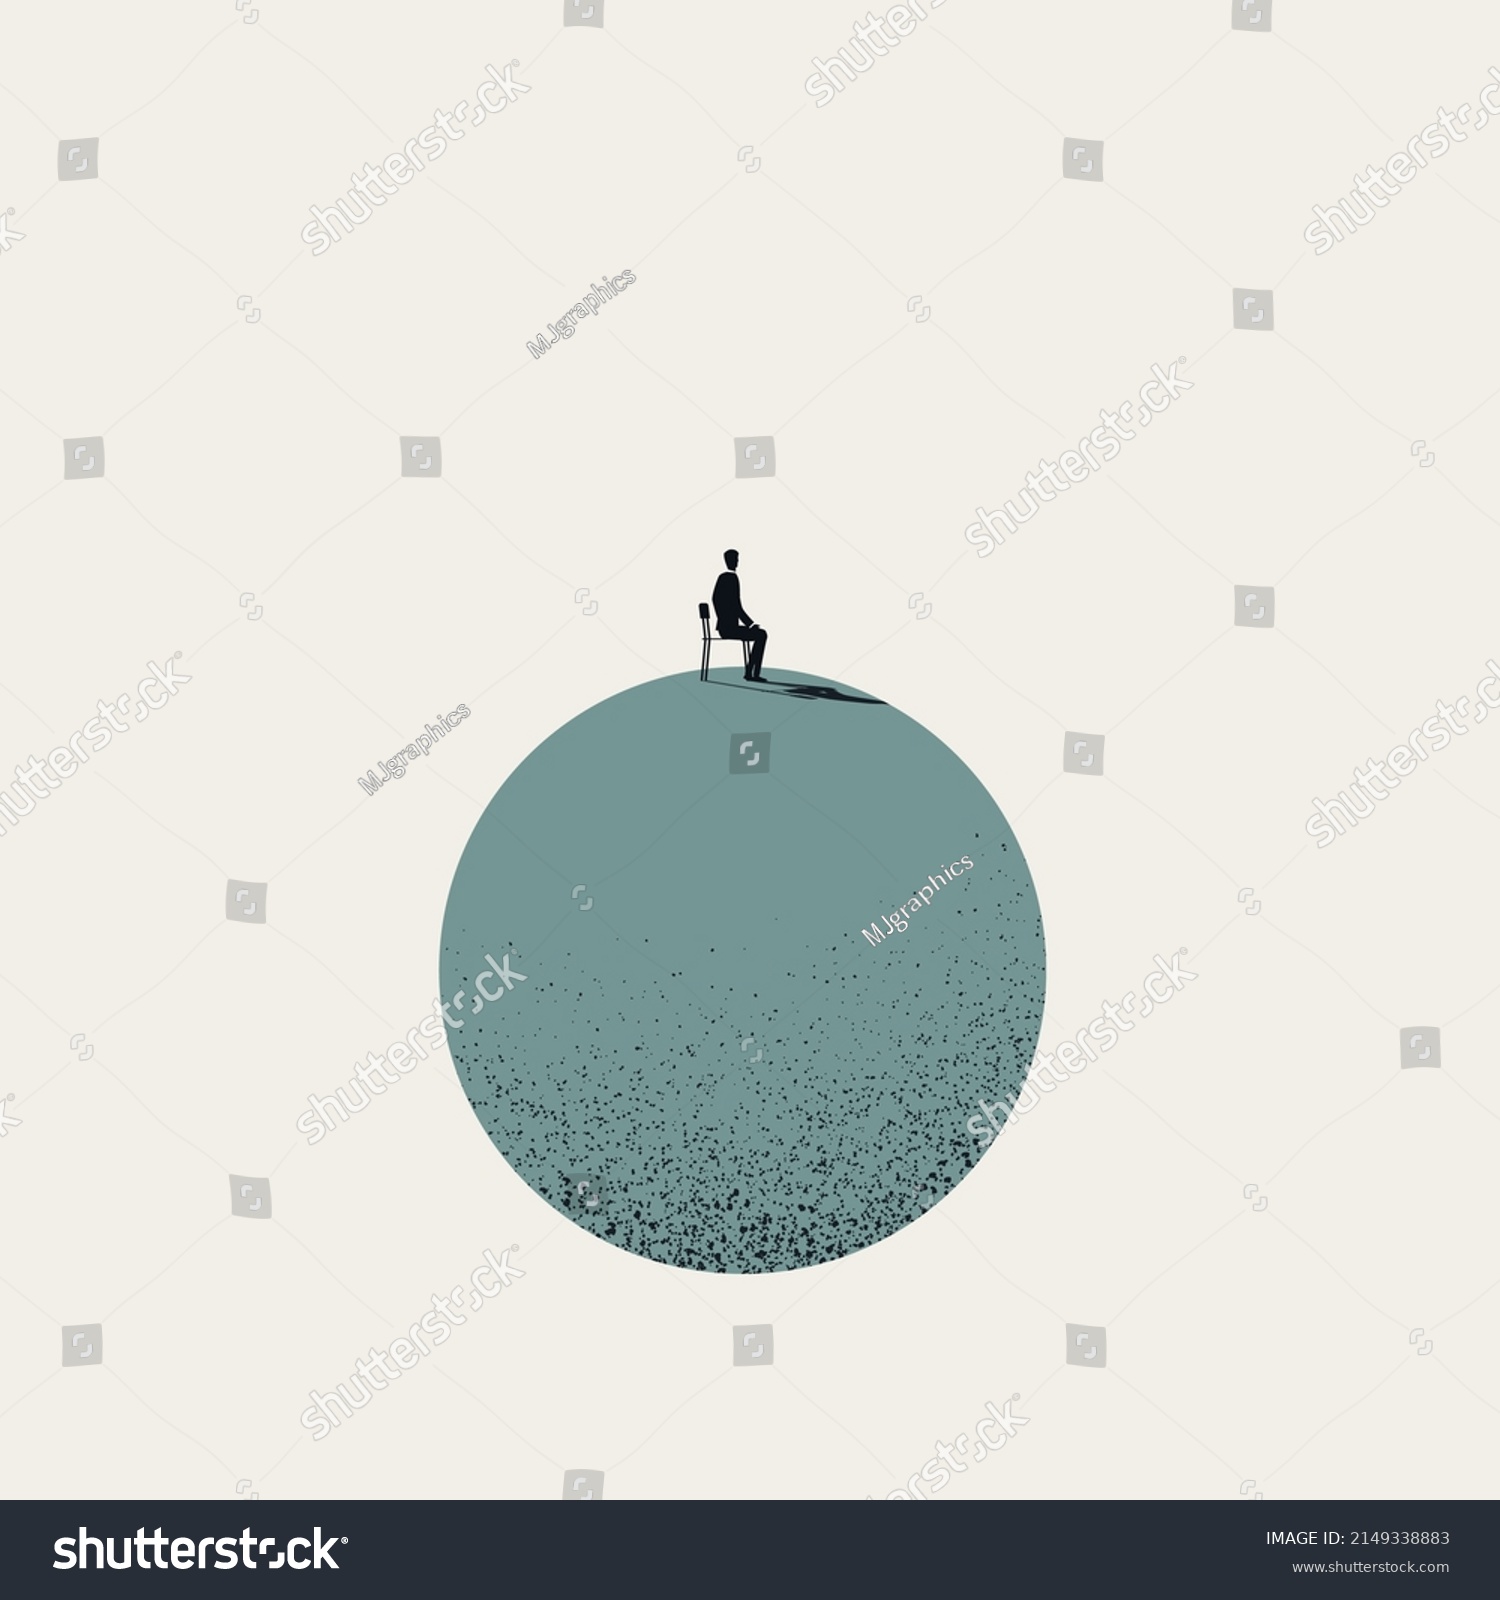 Business or personal contemplation vector concept. Symbol of thinking, having vision. Man sitting on chair. Minimal design eps10 illustration #2149338883